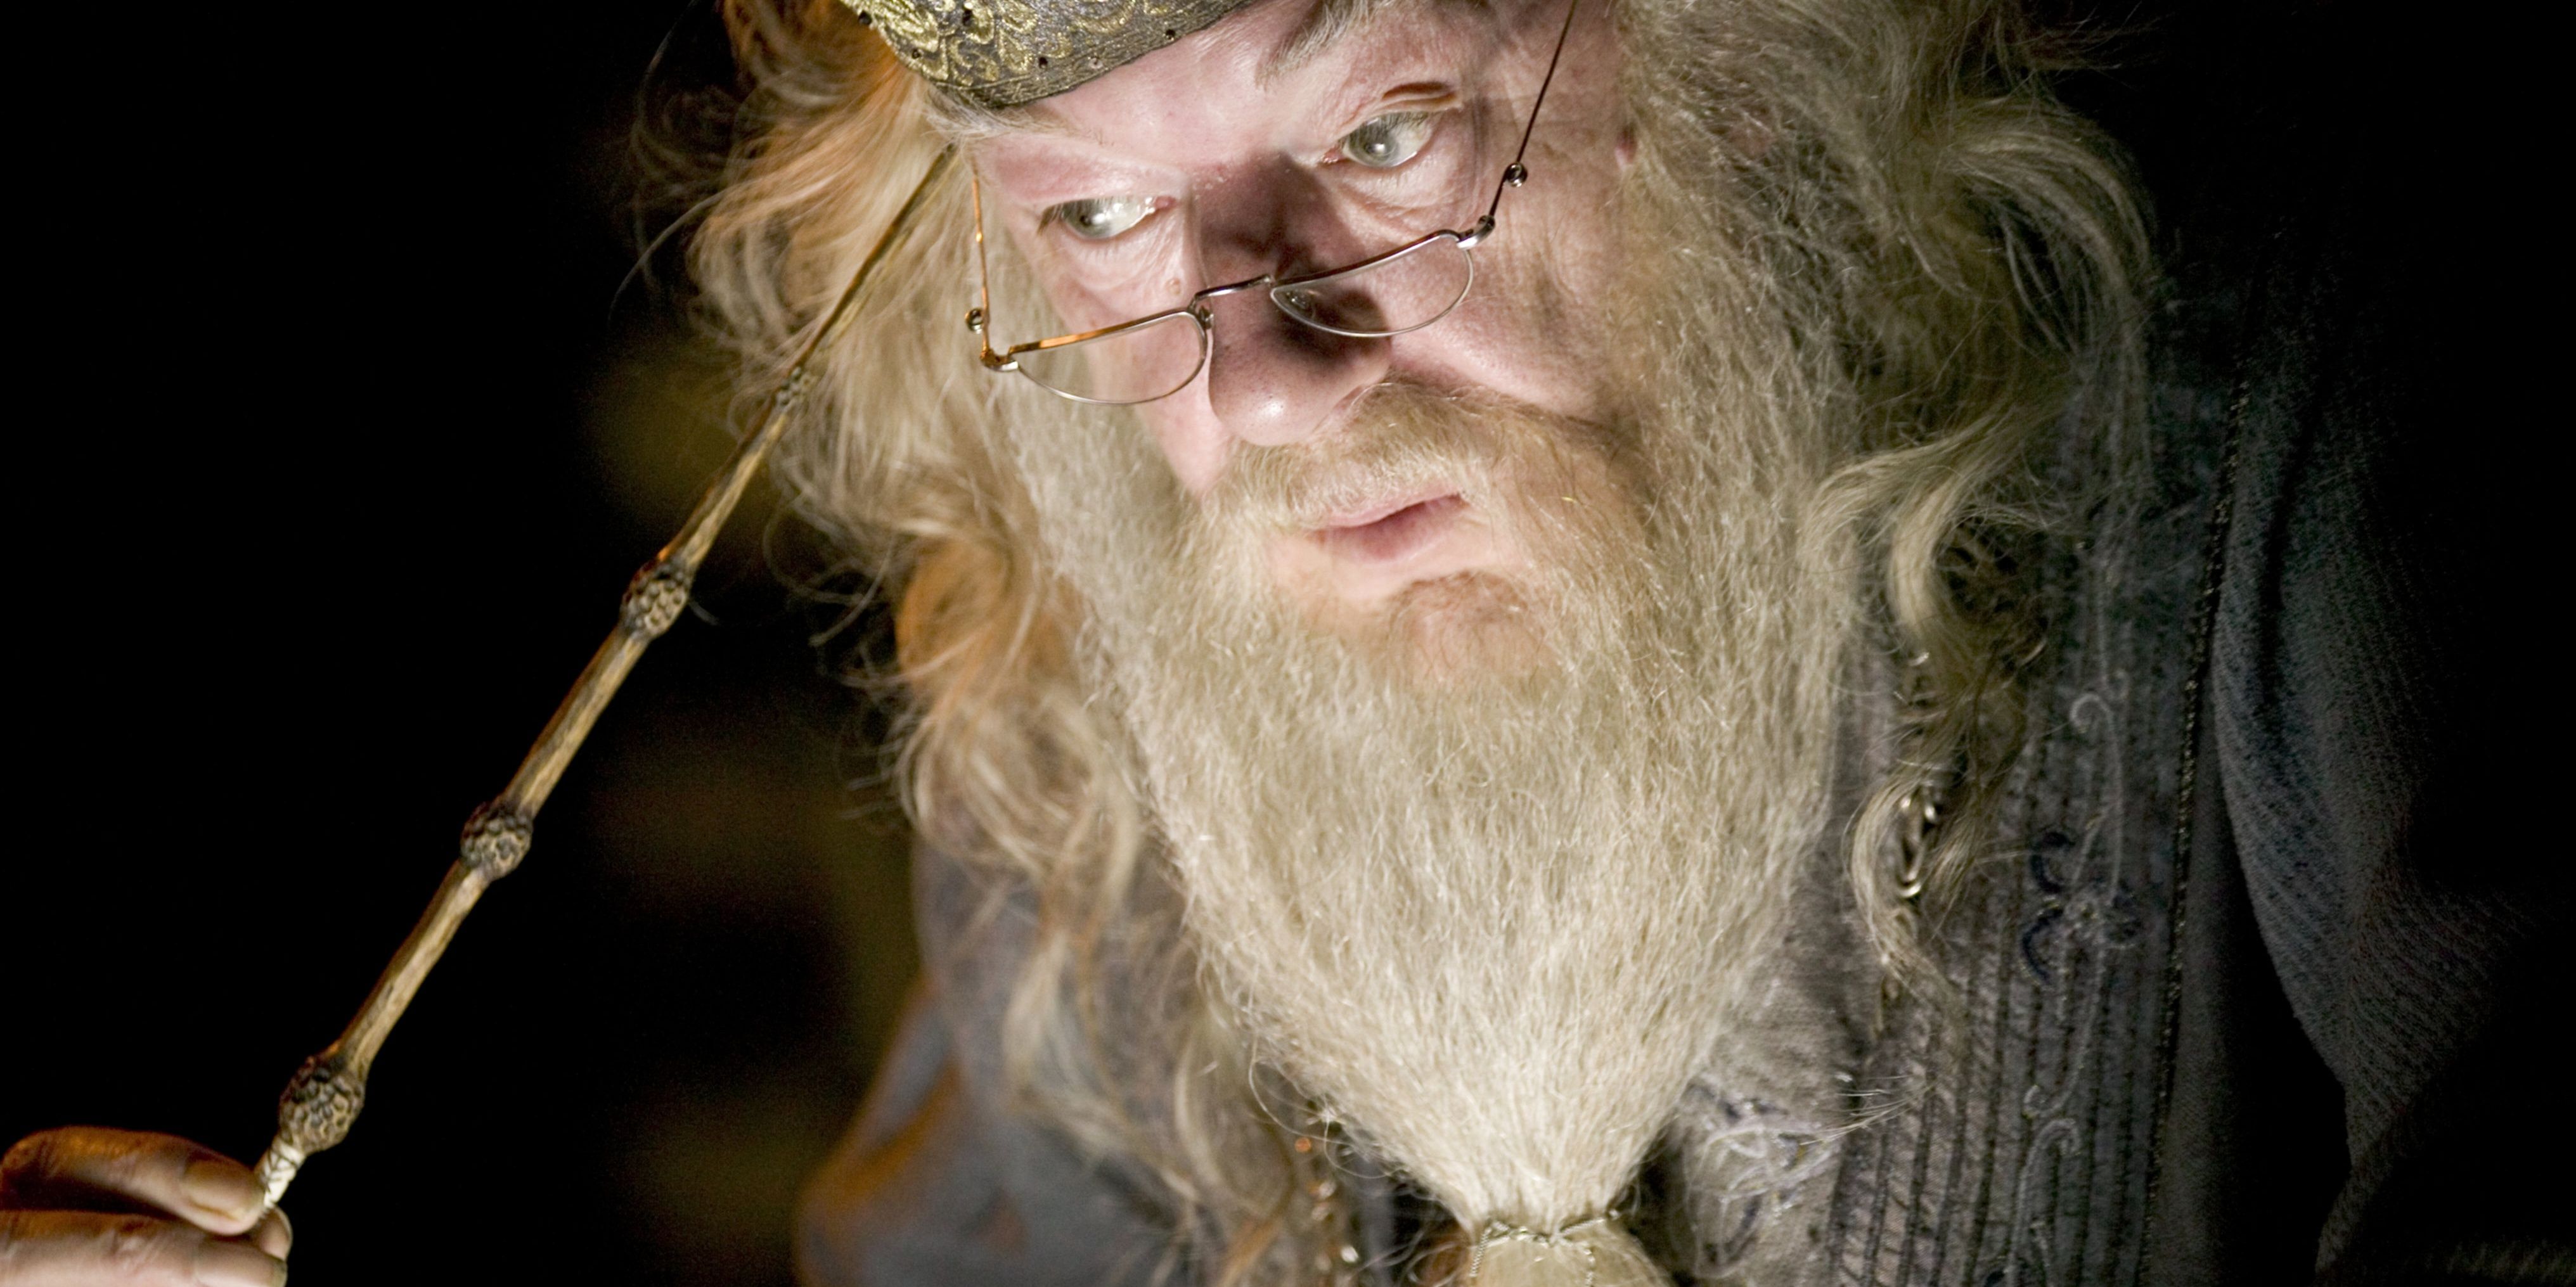 Albus Dumbledore performing a memory charm with the Elder Wand in Harry Potter.